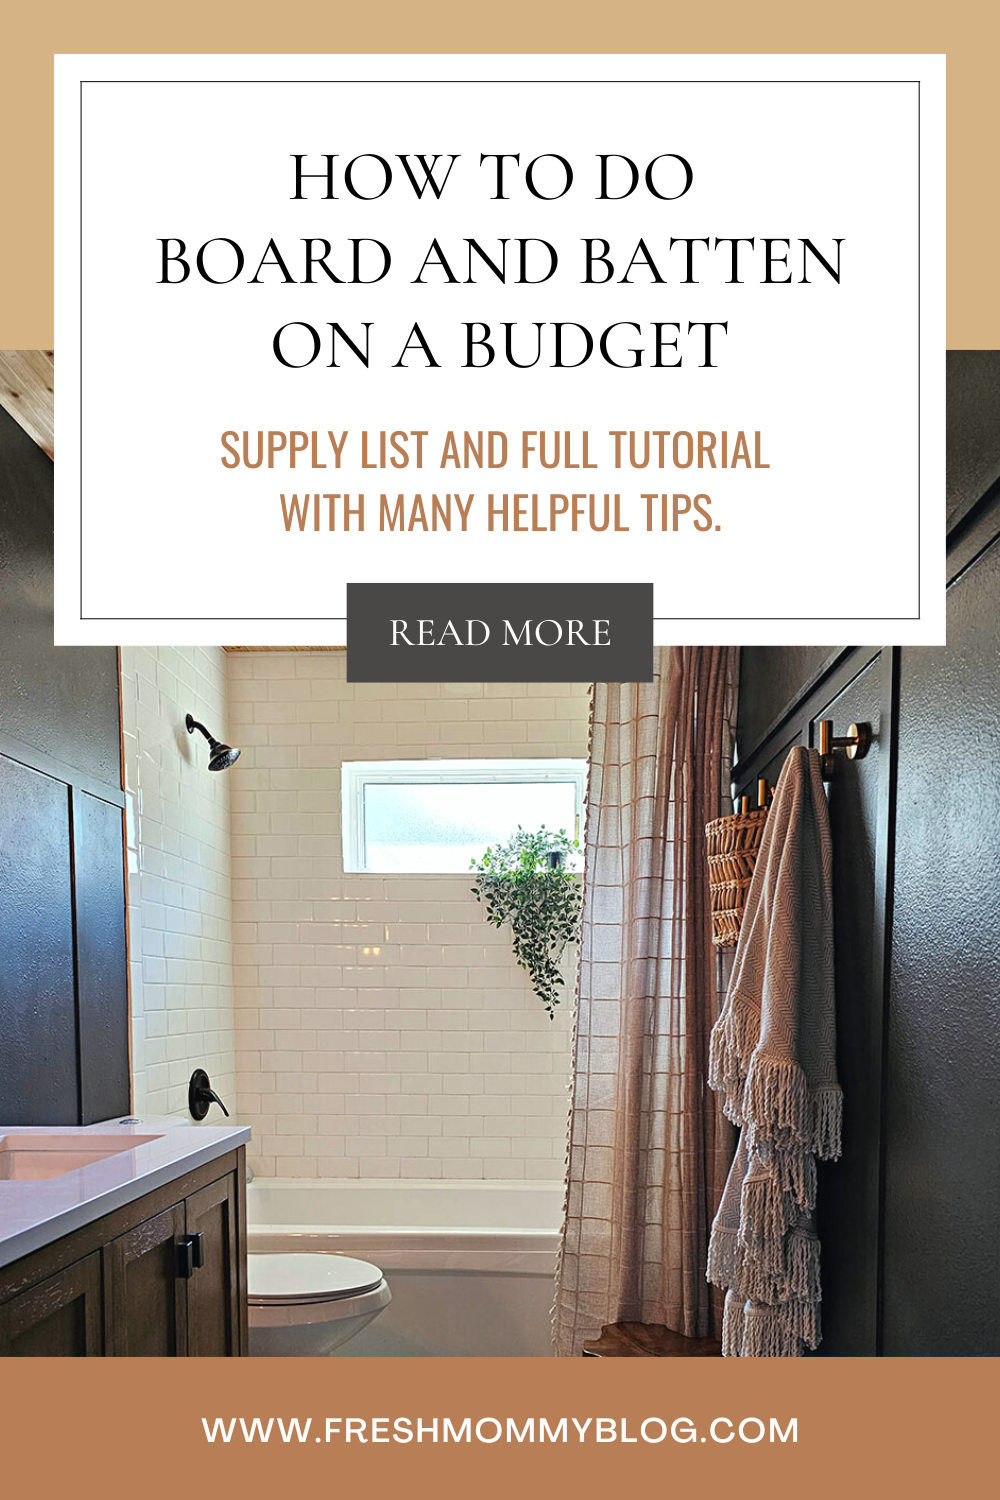 How to do board and batten on a budget. Supply list and full tutorial with many helpful tips.